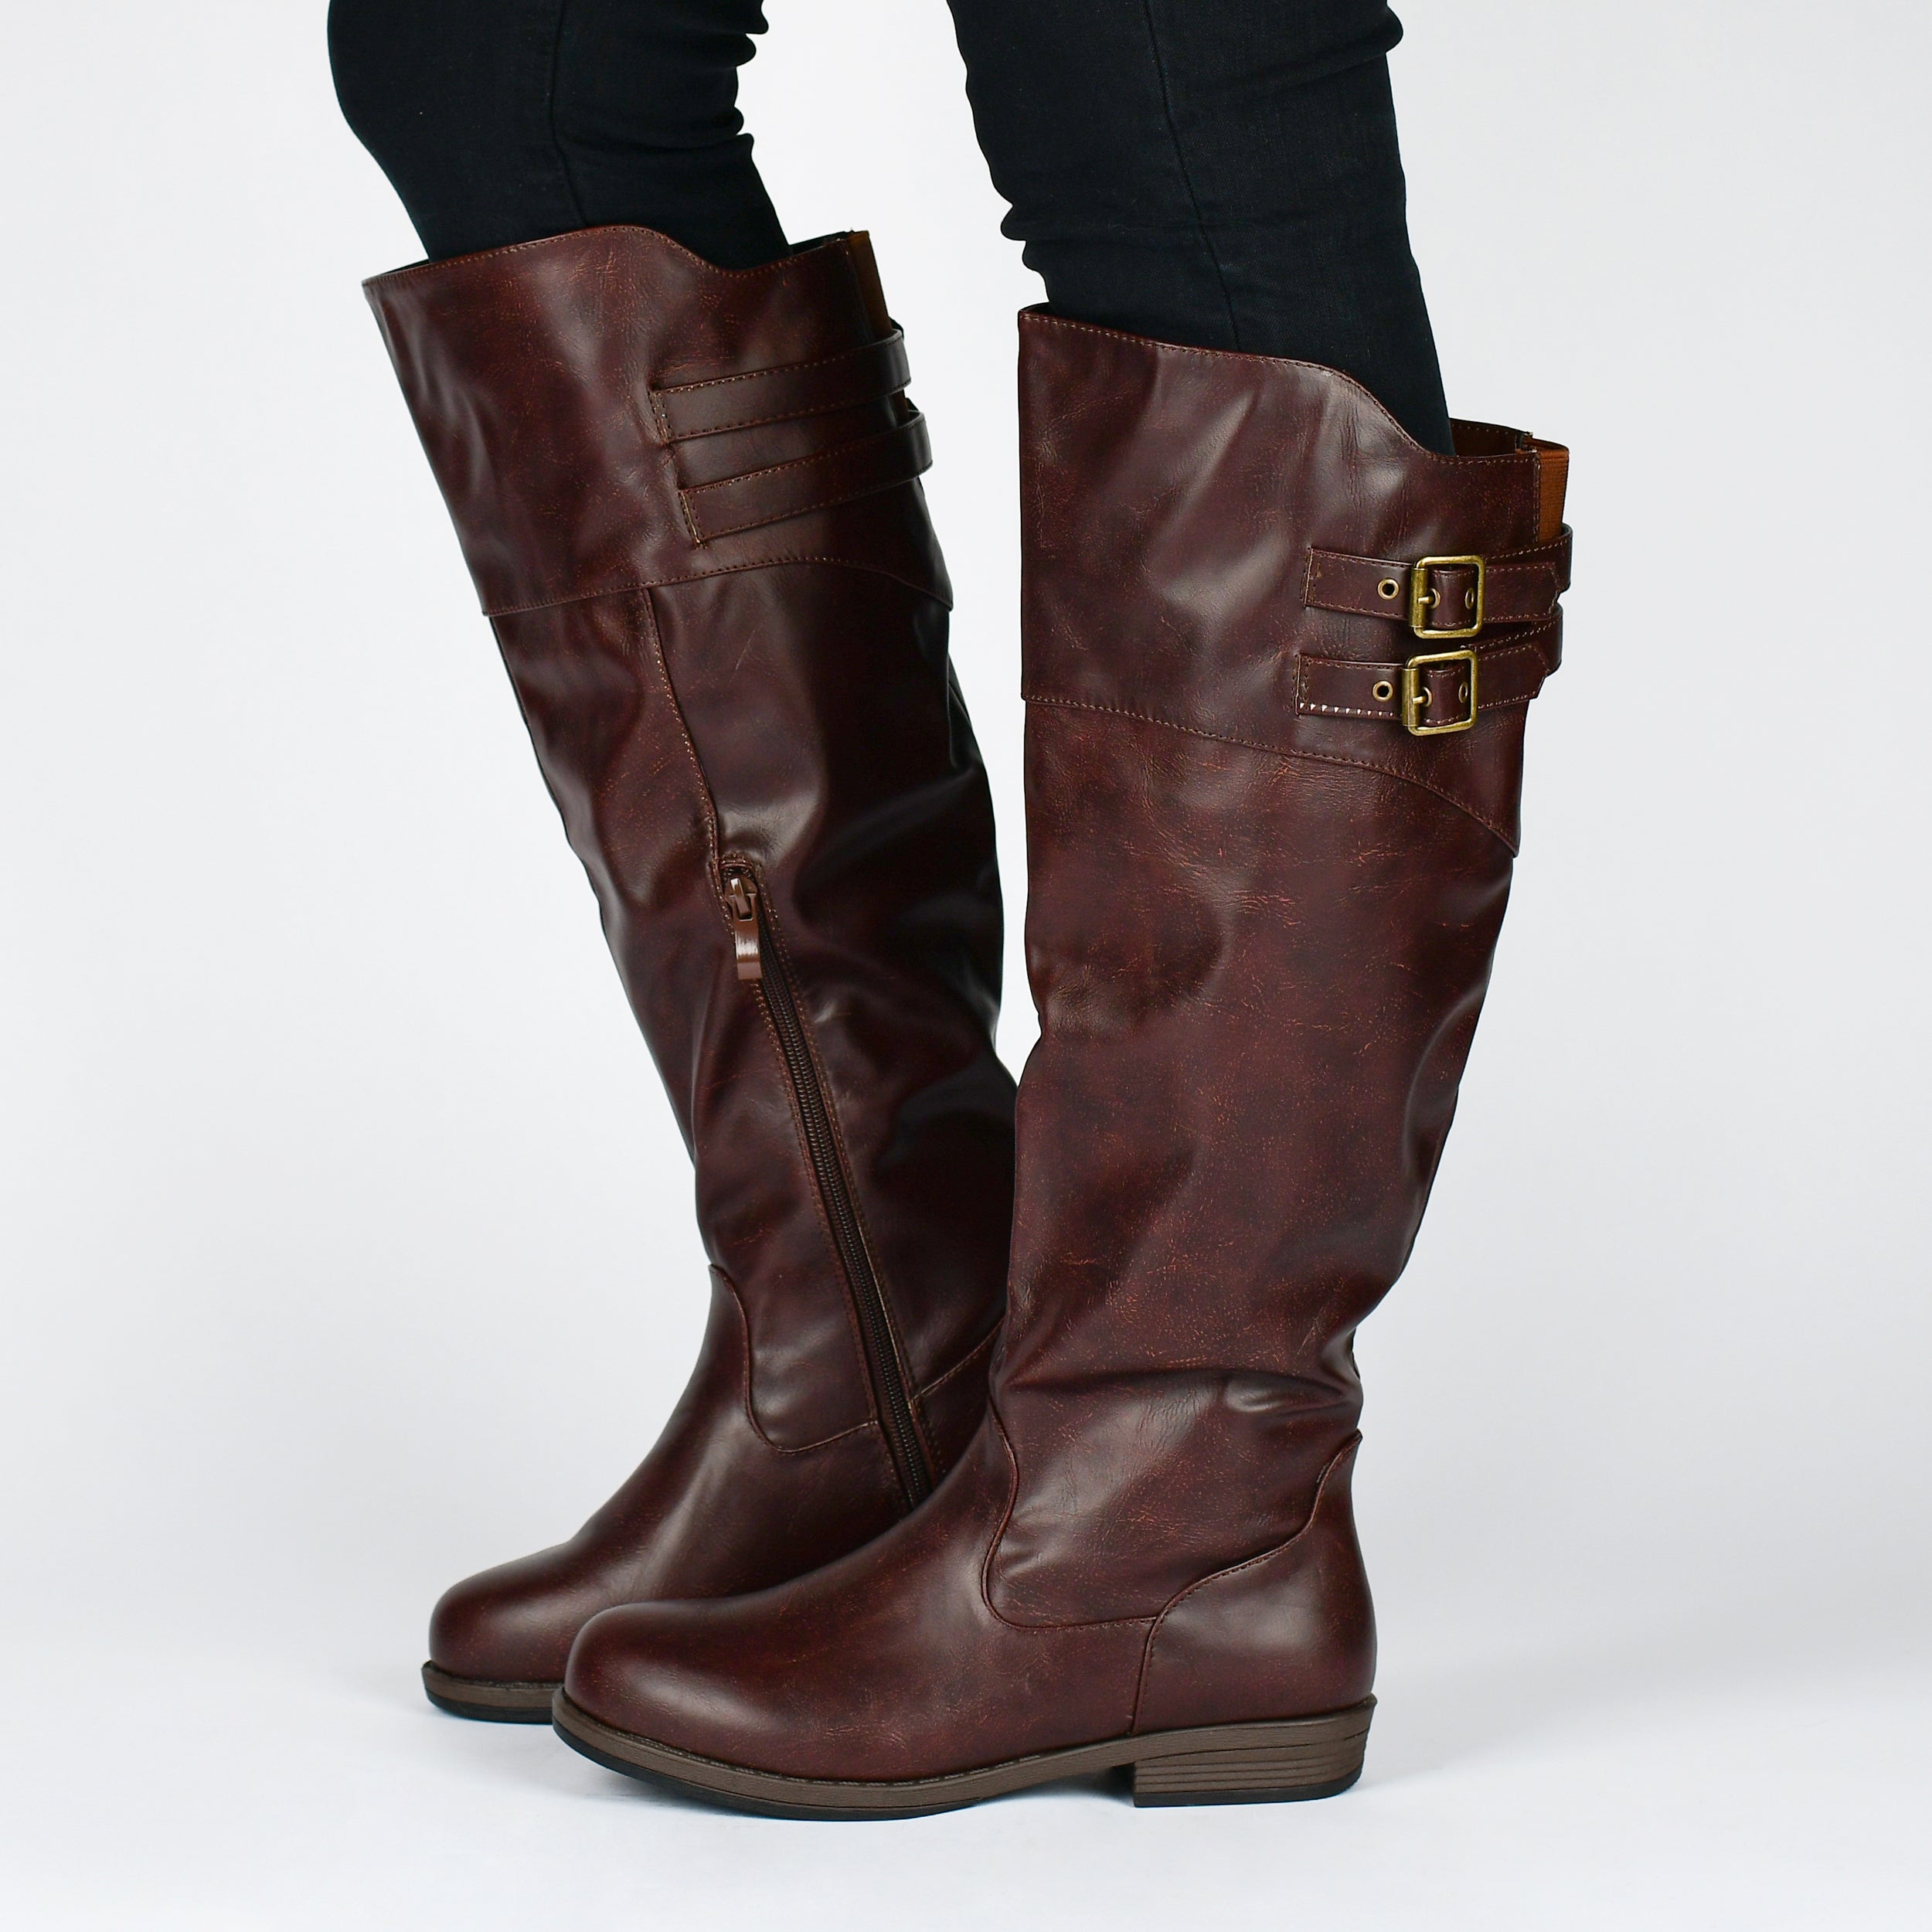 Tori Boot | Women's Double Buckle Boots | Journee Collection